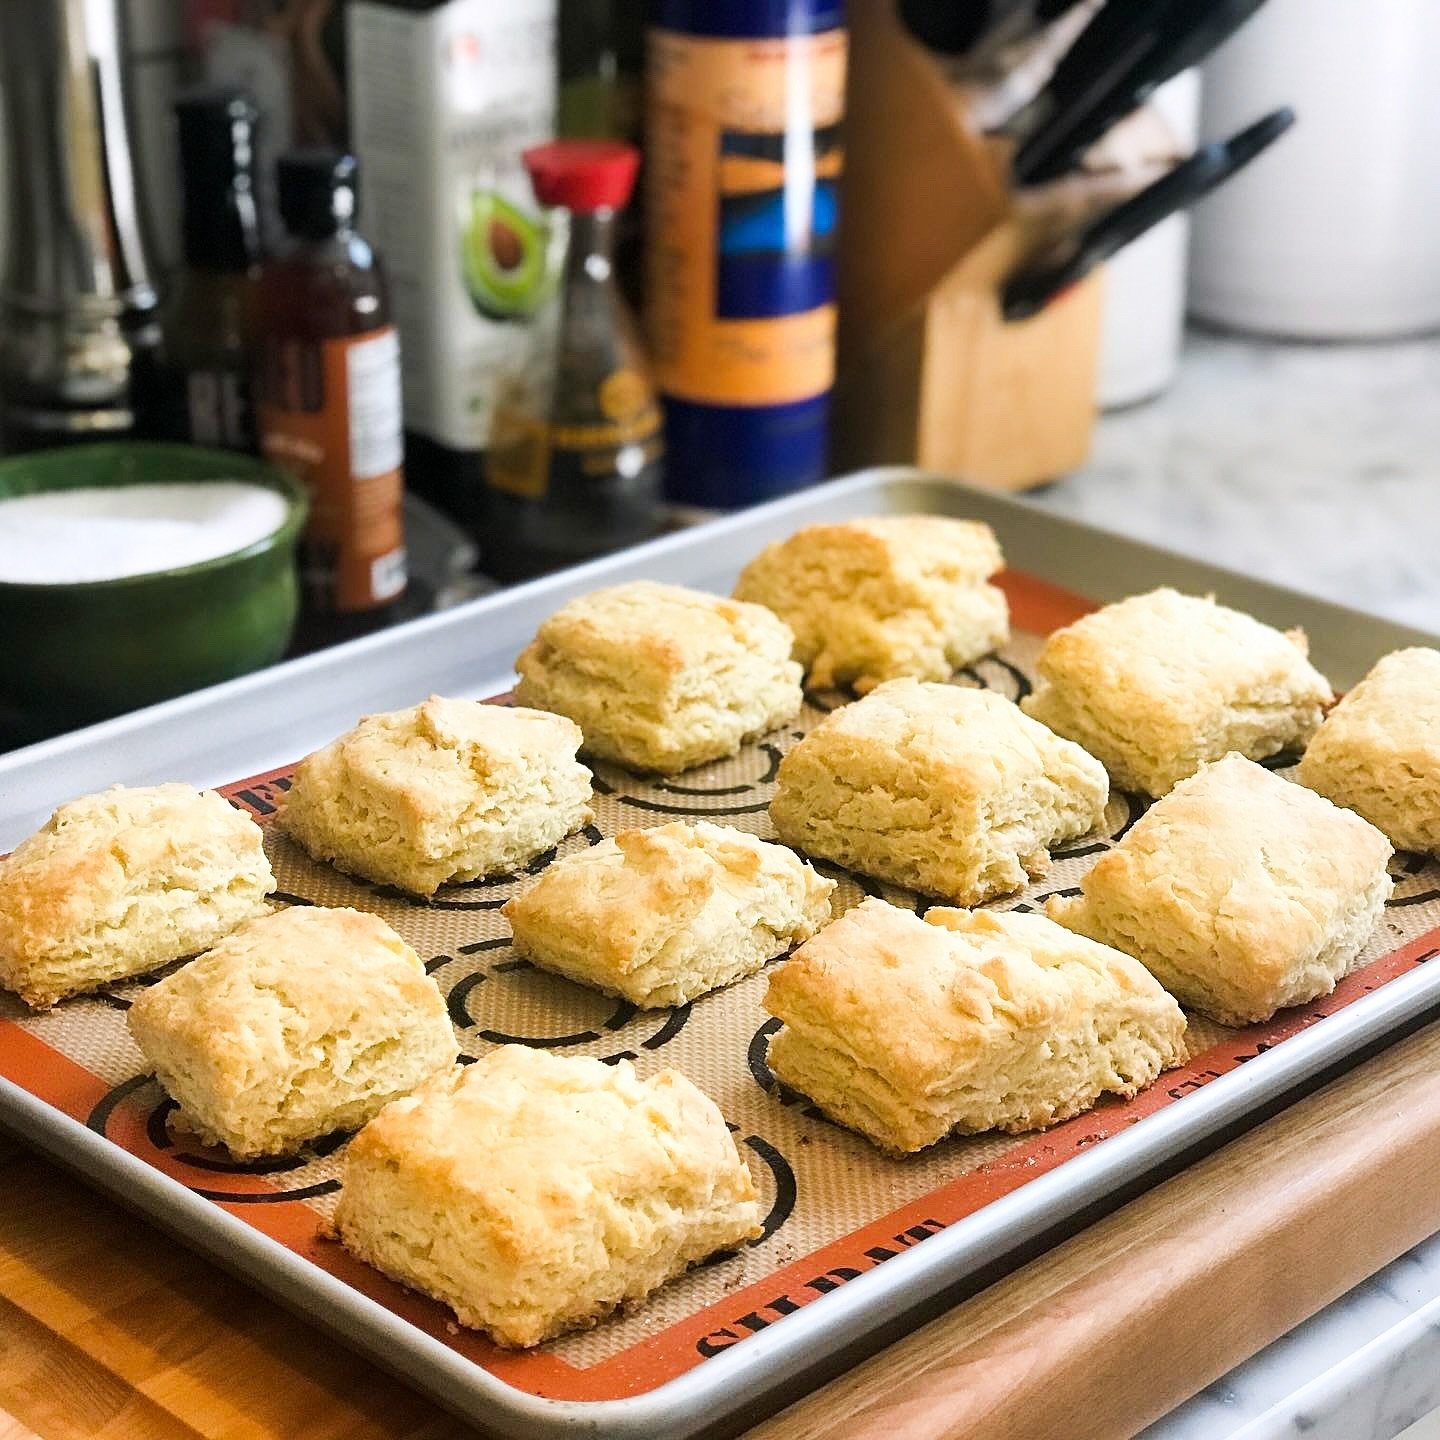 Happy Buttermilk Biscuit Day!
Comment BISCUIT and I will share with you my grandmother&rsquo;s buttermilk biscuit recipe

She made buttermilk biscuits three times a day in her North Carolina kitchen for her family and any one else who stopped by to v